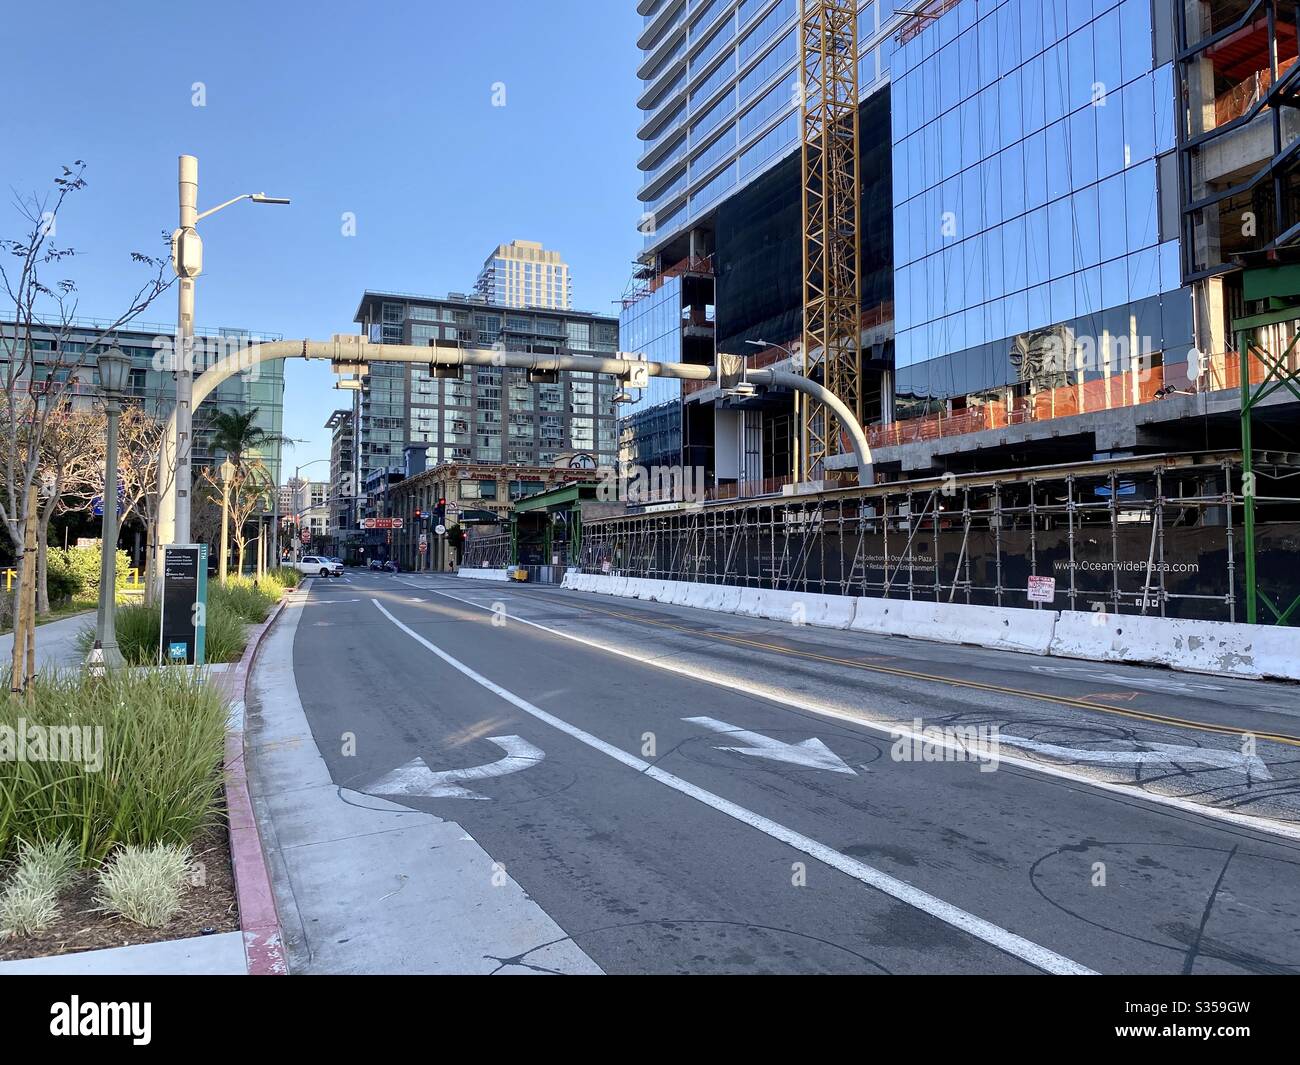 LOS ANGELES, CA, MAR 2020: empty streets near Staples Center and LA Live sports and entertainment venues during coronavirus 'stay at home' orders in South Park area of Downtown Stock Photo